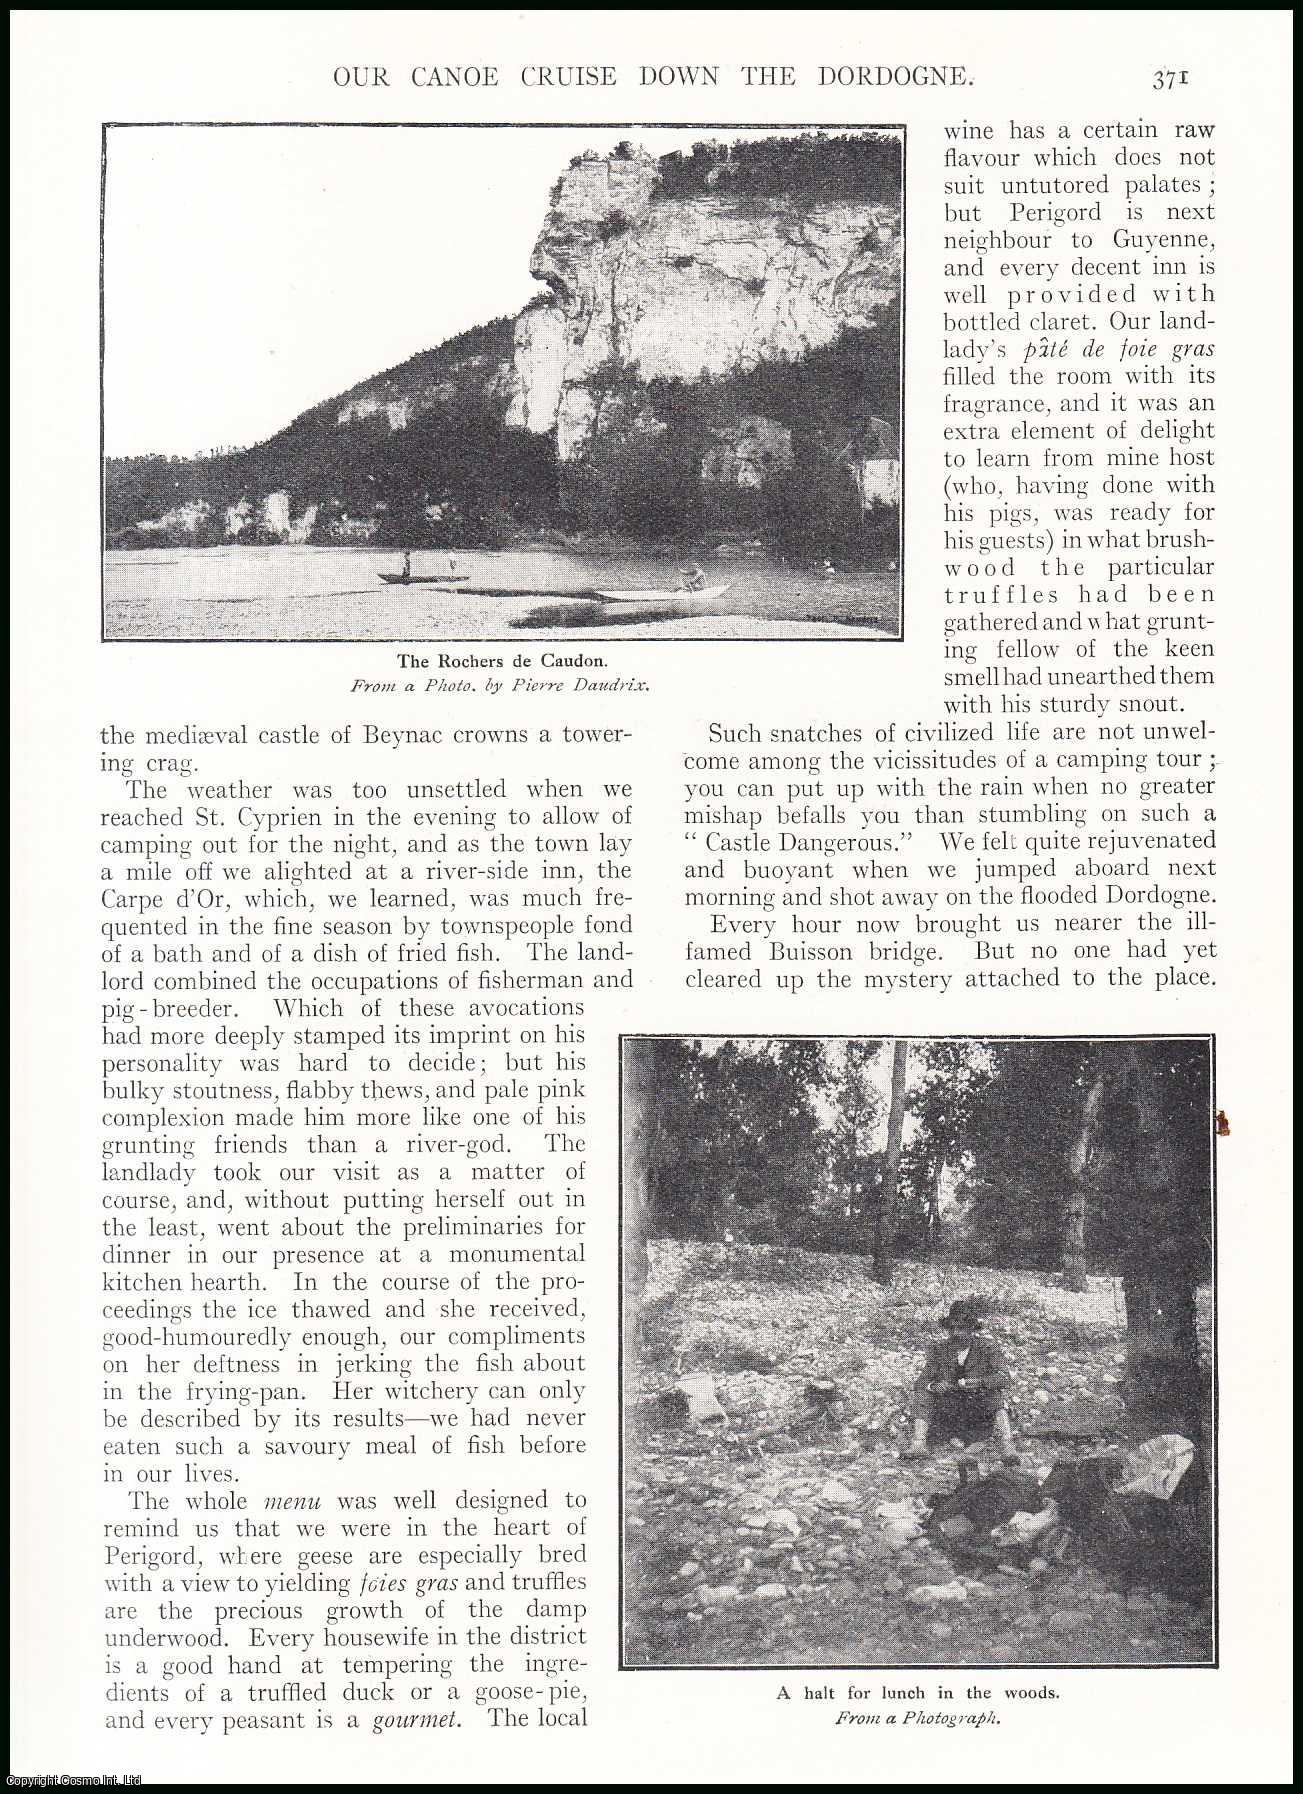 C. Cestre - Our Canoe Cruise Down The Dordogne, in France. An uncommon original article from the Wide World Magazine, 1913.